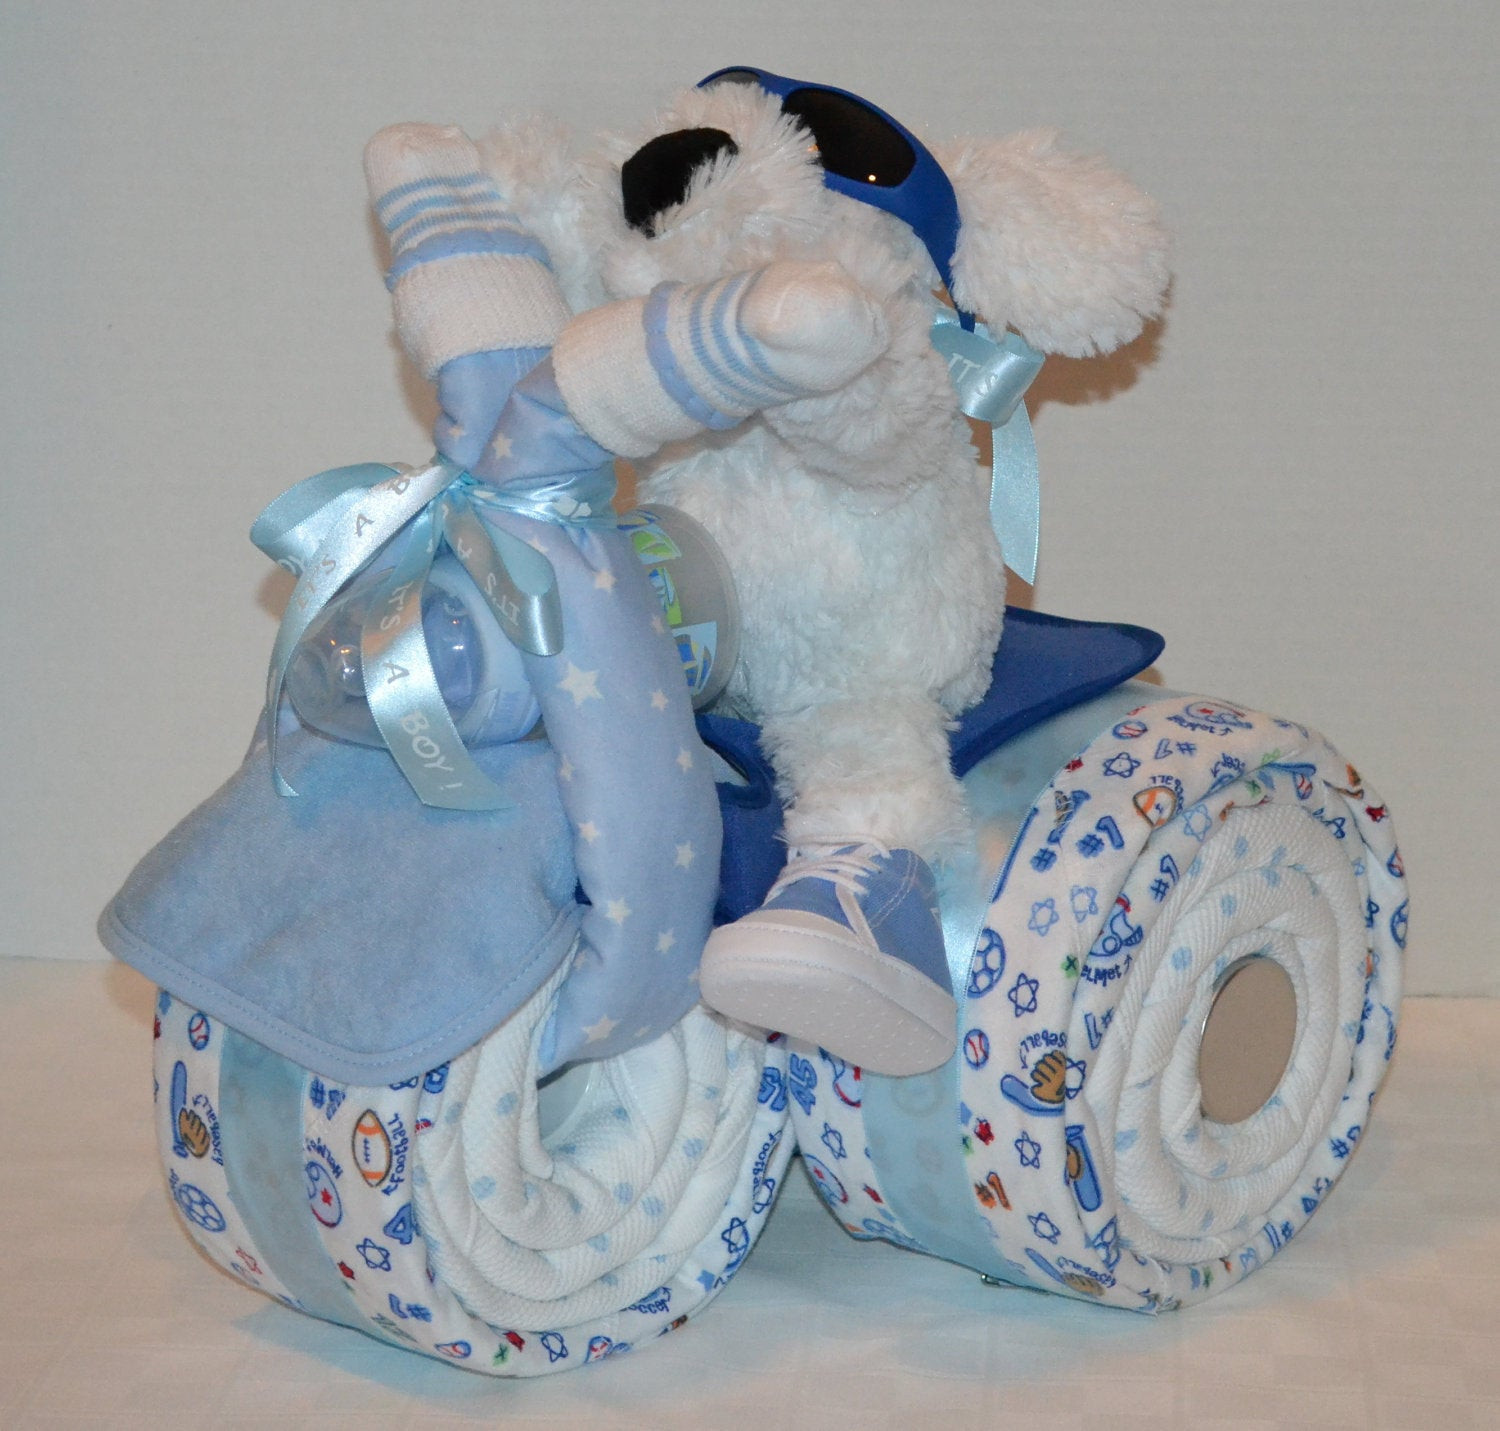 Unique Baby Shower Gift Ideas For Boys
 Tricycle Trike Diaper Cake Baby Shower Gift Sports theme